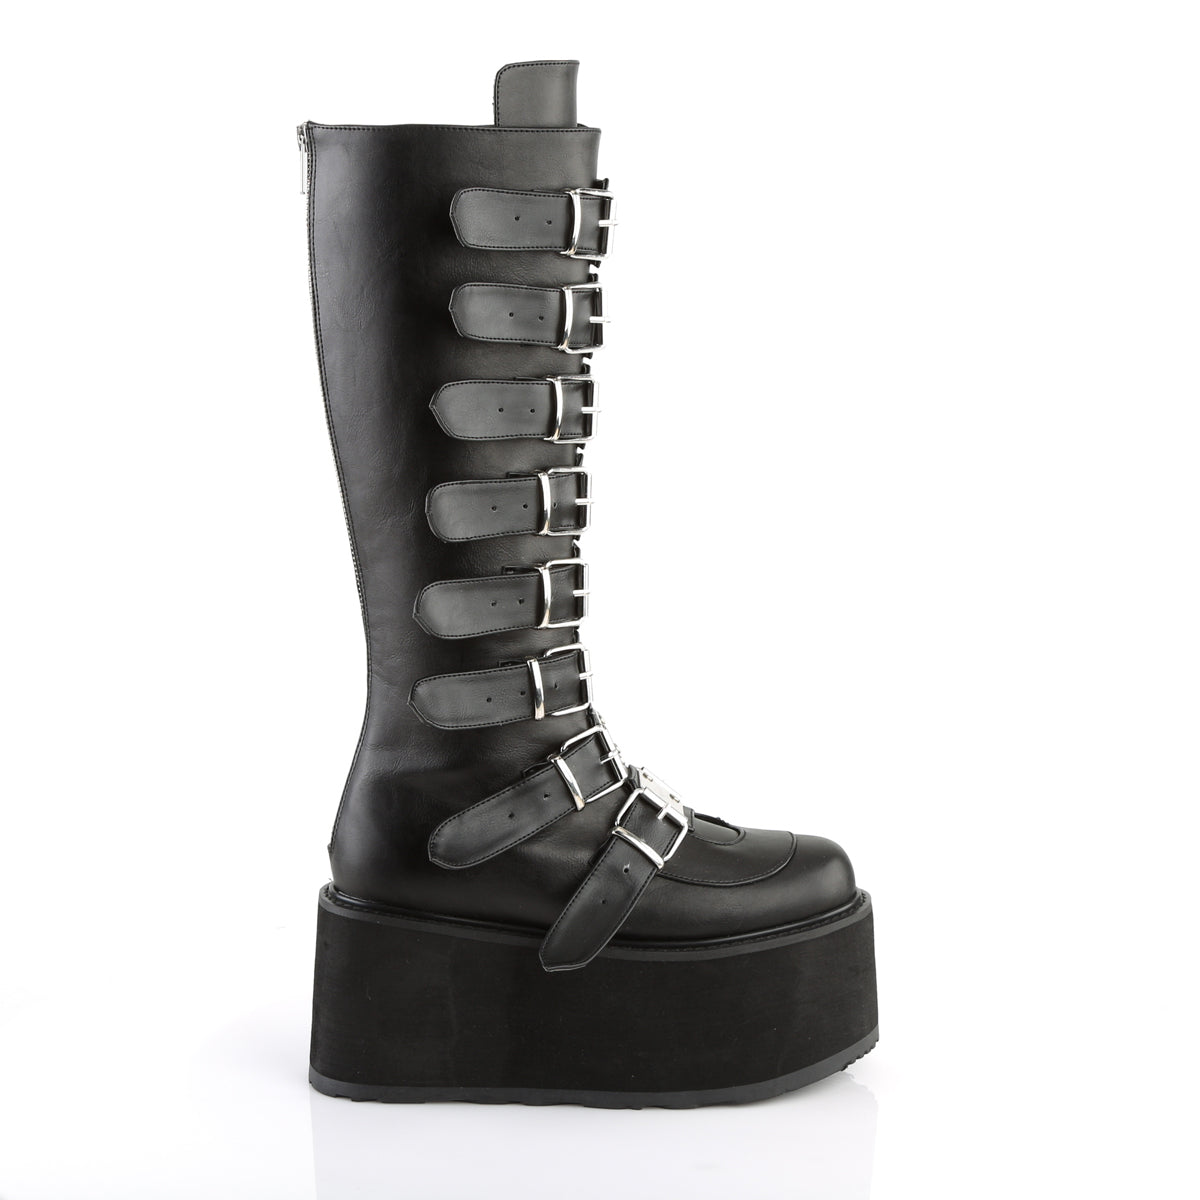 DemoniaCult Womens Boots DAMNED-318 Blk Vegan Leather